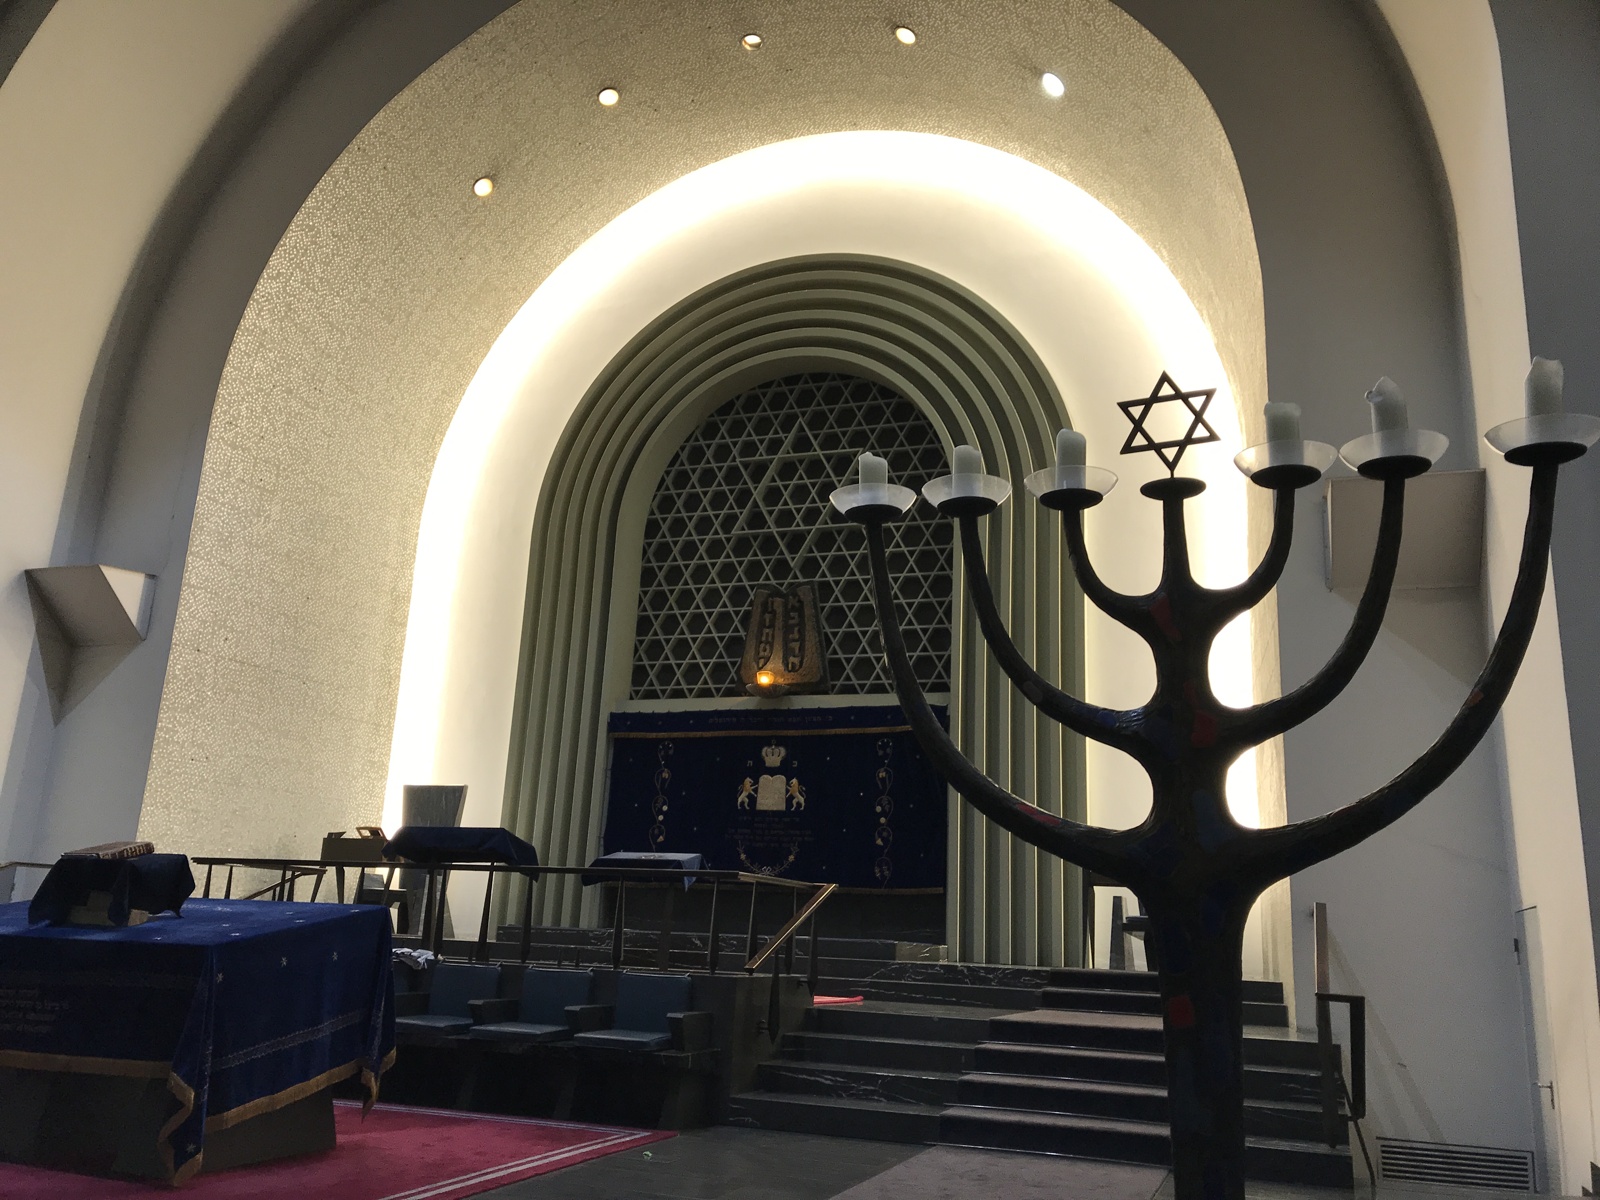 Inside of the synagogue